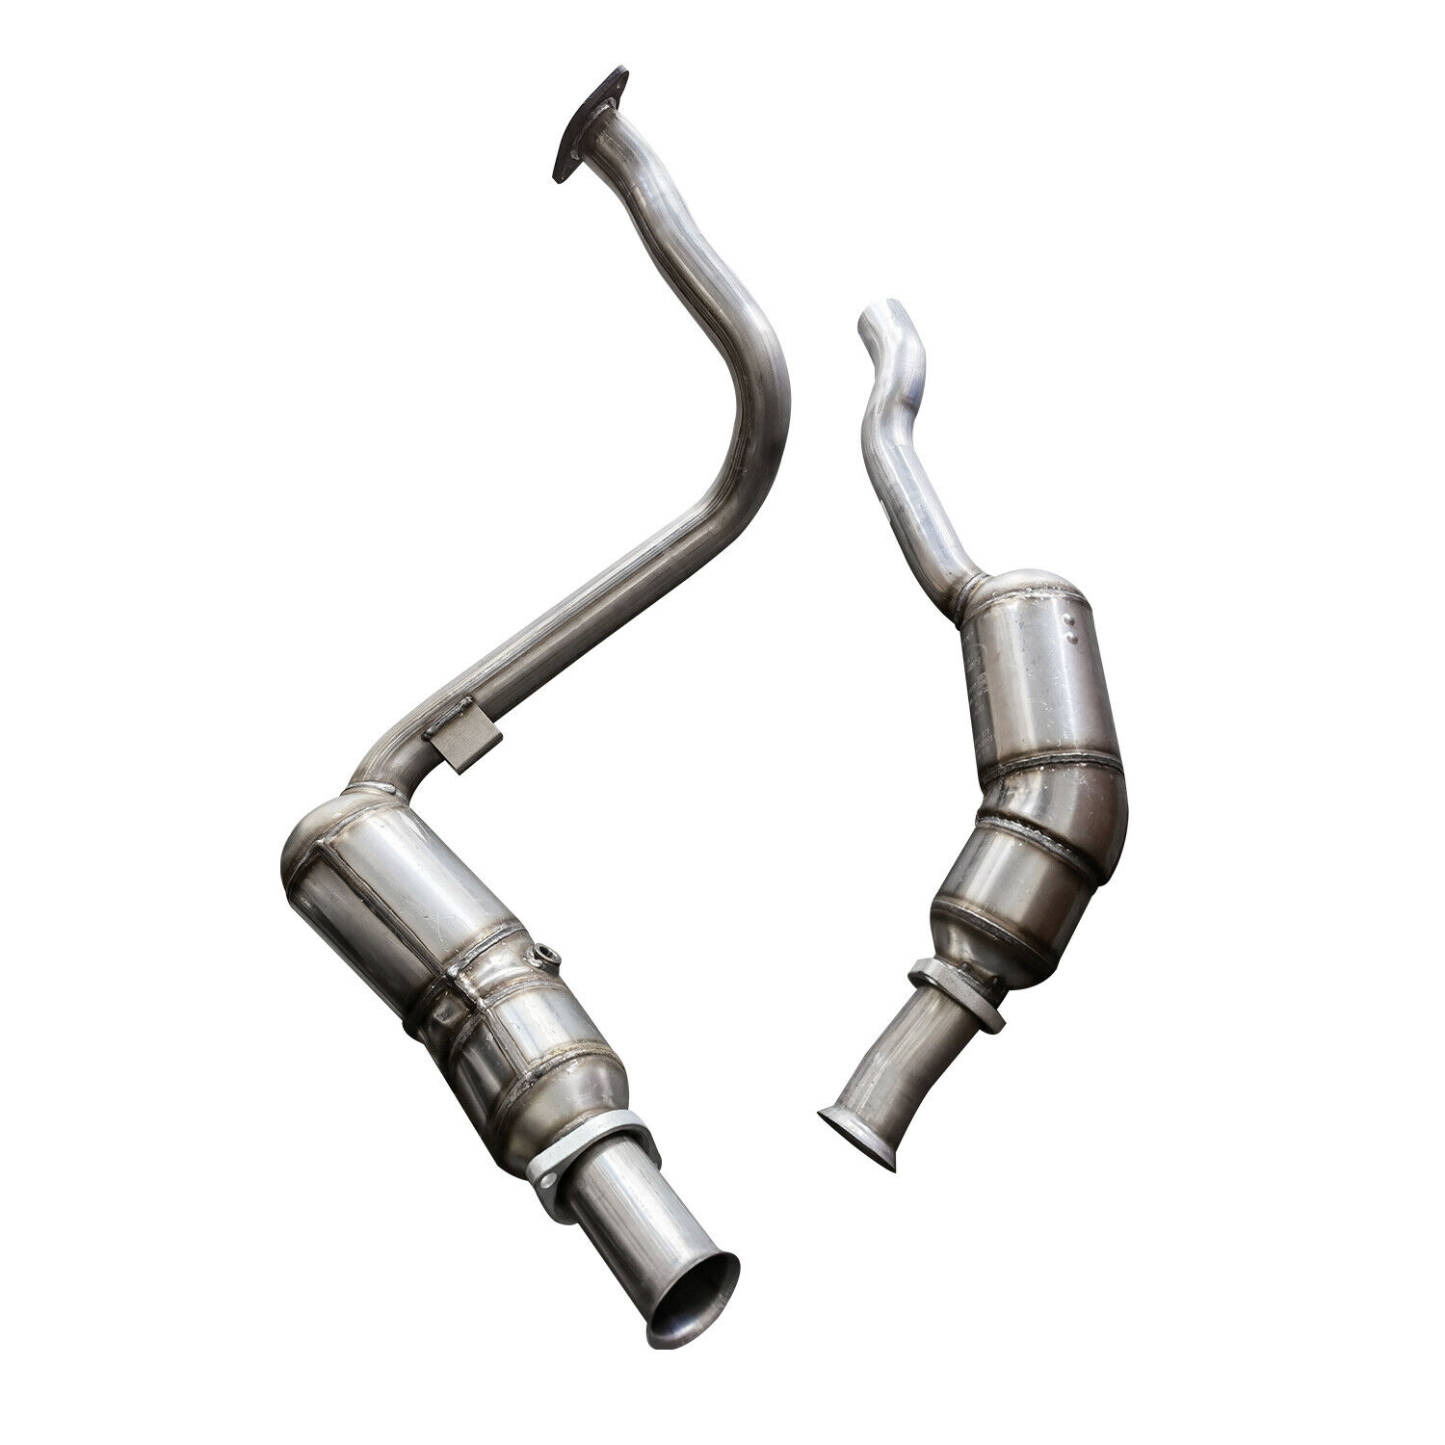 2010-2013 Land Rover LR4 Front Catalytic Converter Exhaust Pipe fit for Land Rover LR4 Range Rover Sport 5.0L